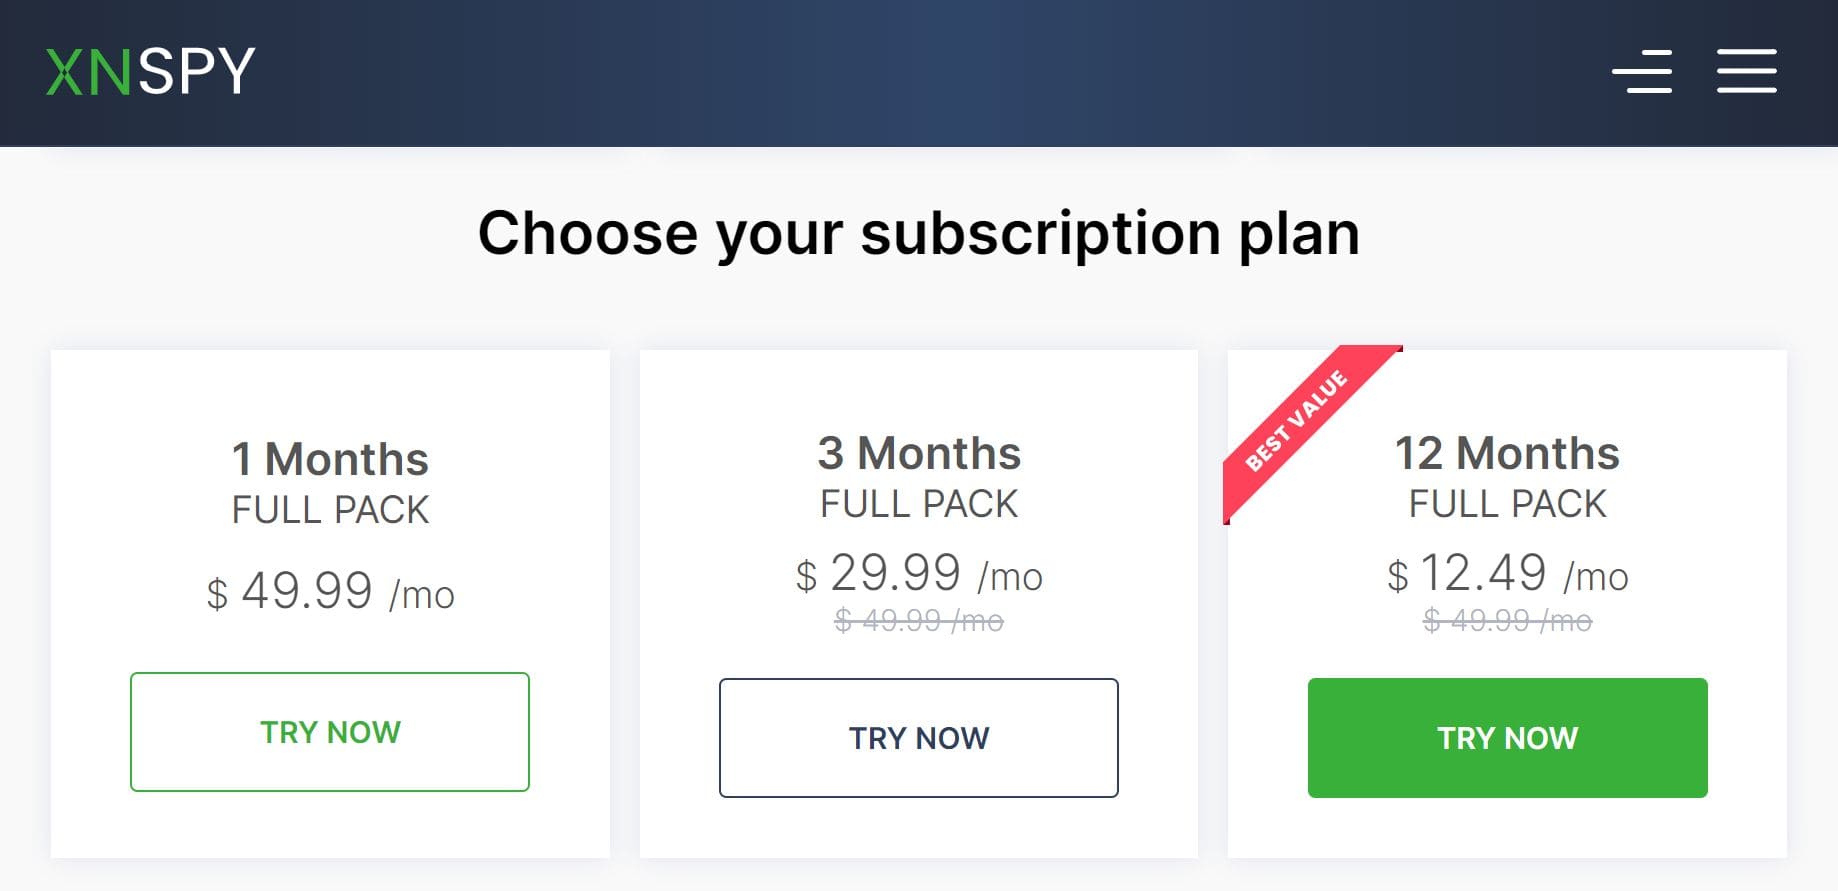 Screen to choose subscription plans in XNSPY